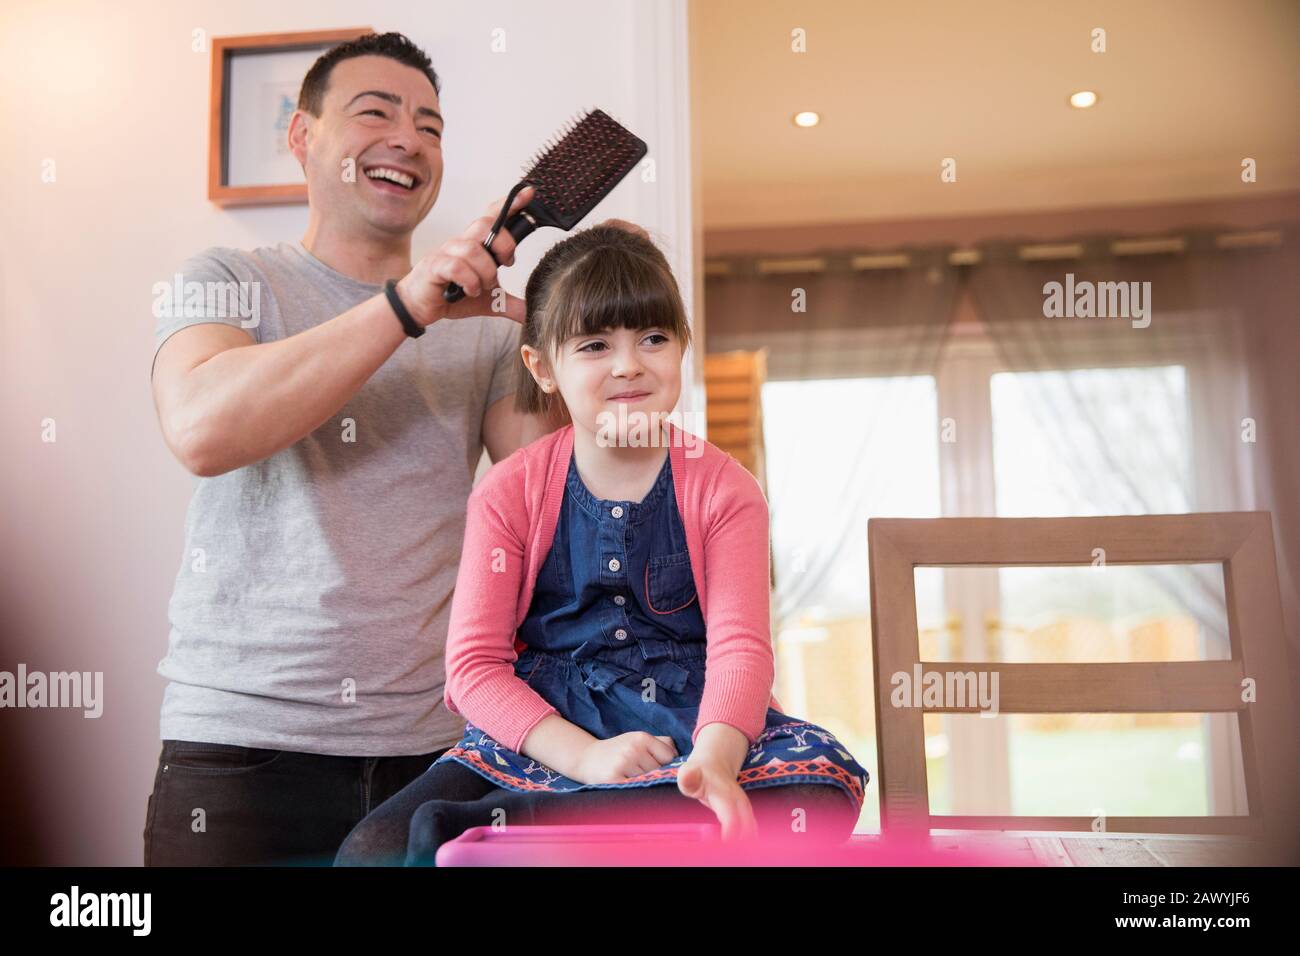 Father brushing daughter's hair Stock Photo